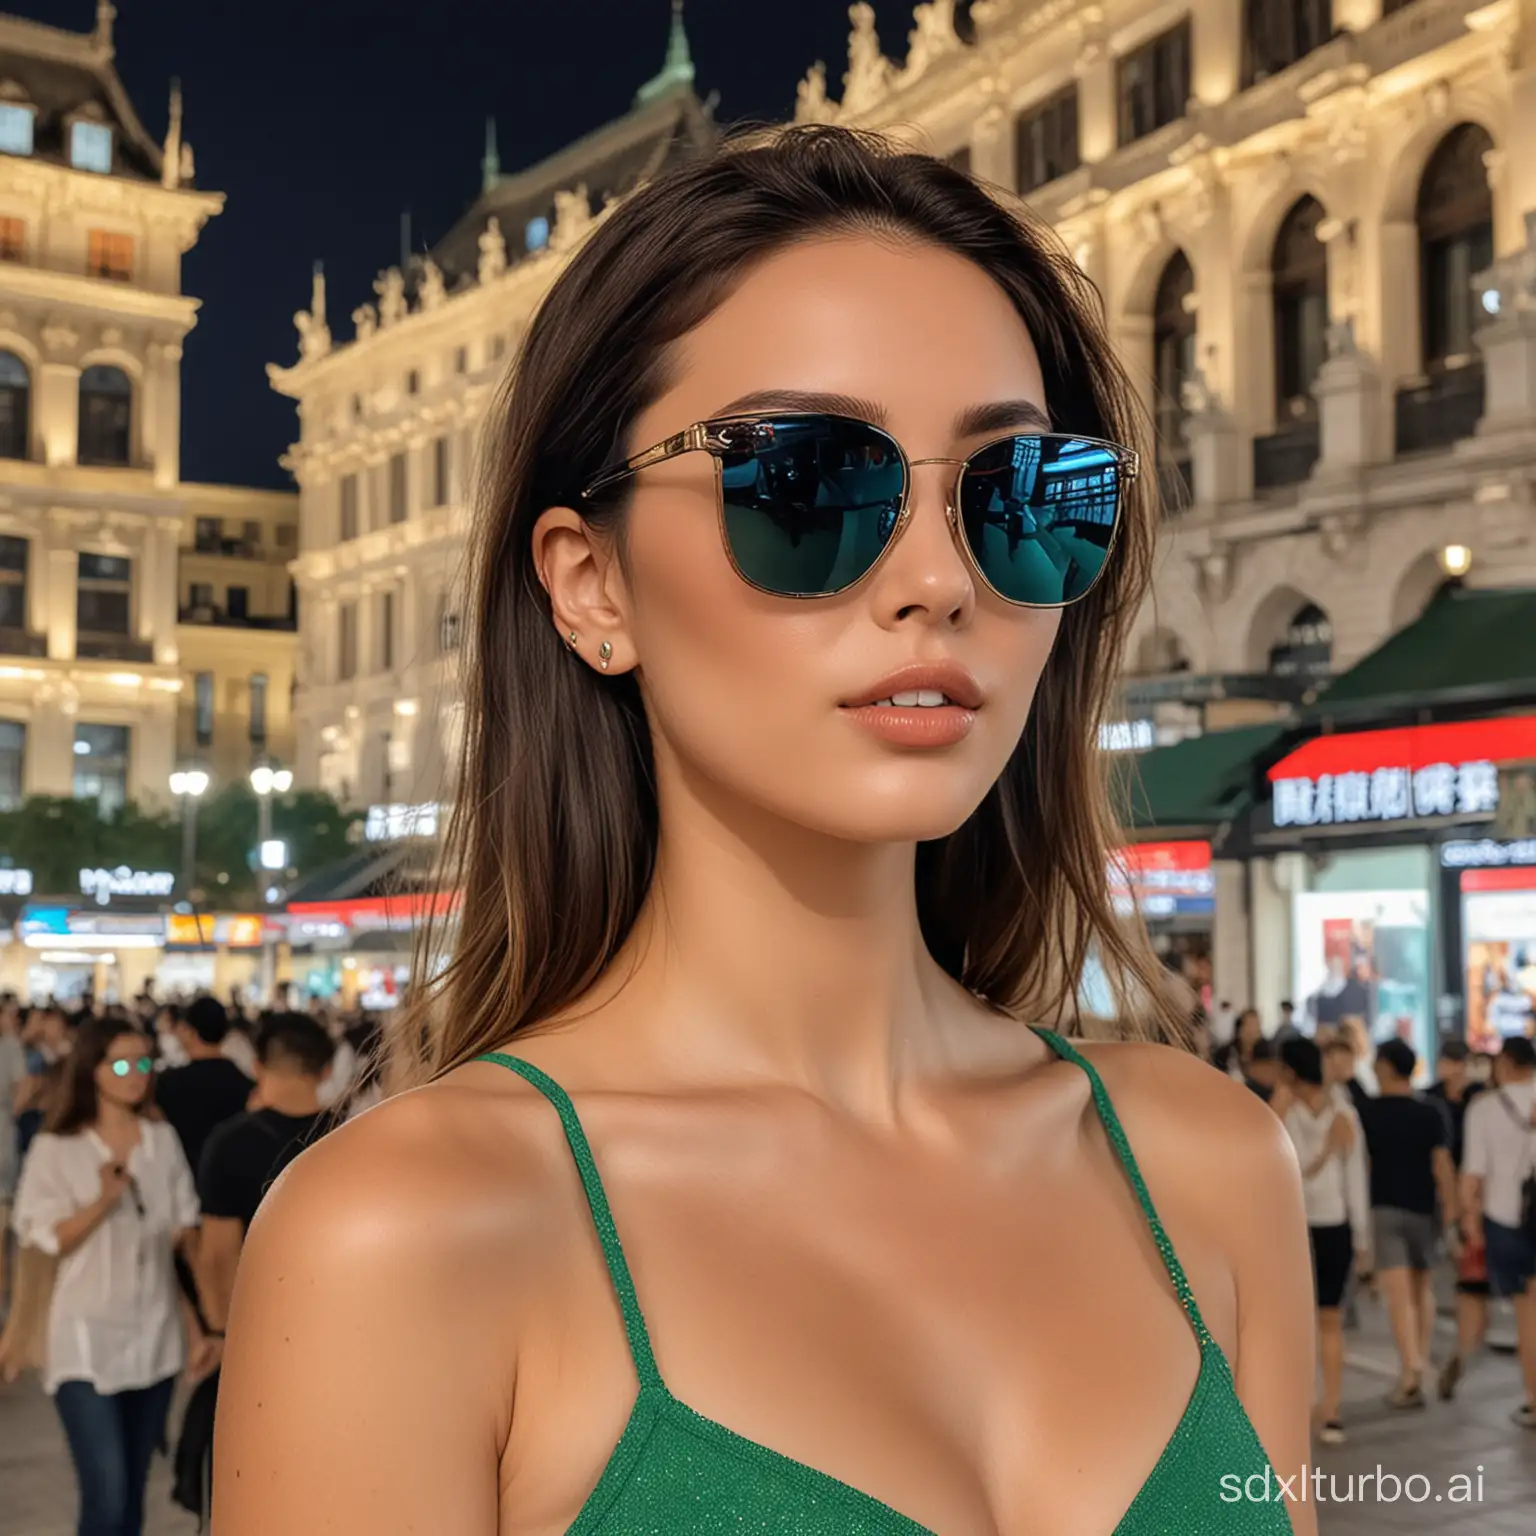 In the center of a busy square there is a hot and sexy European beauty with black sunglasses, shuttling jade among the crowd, the square is brightly lit, high-tech products are endless, and now the sense of technology is full!